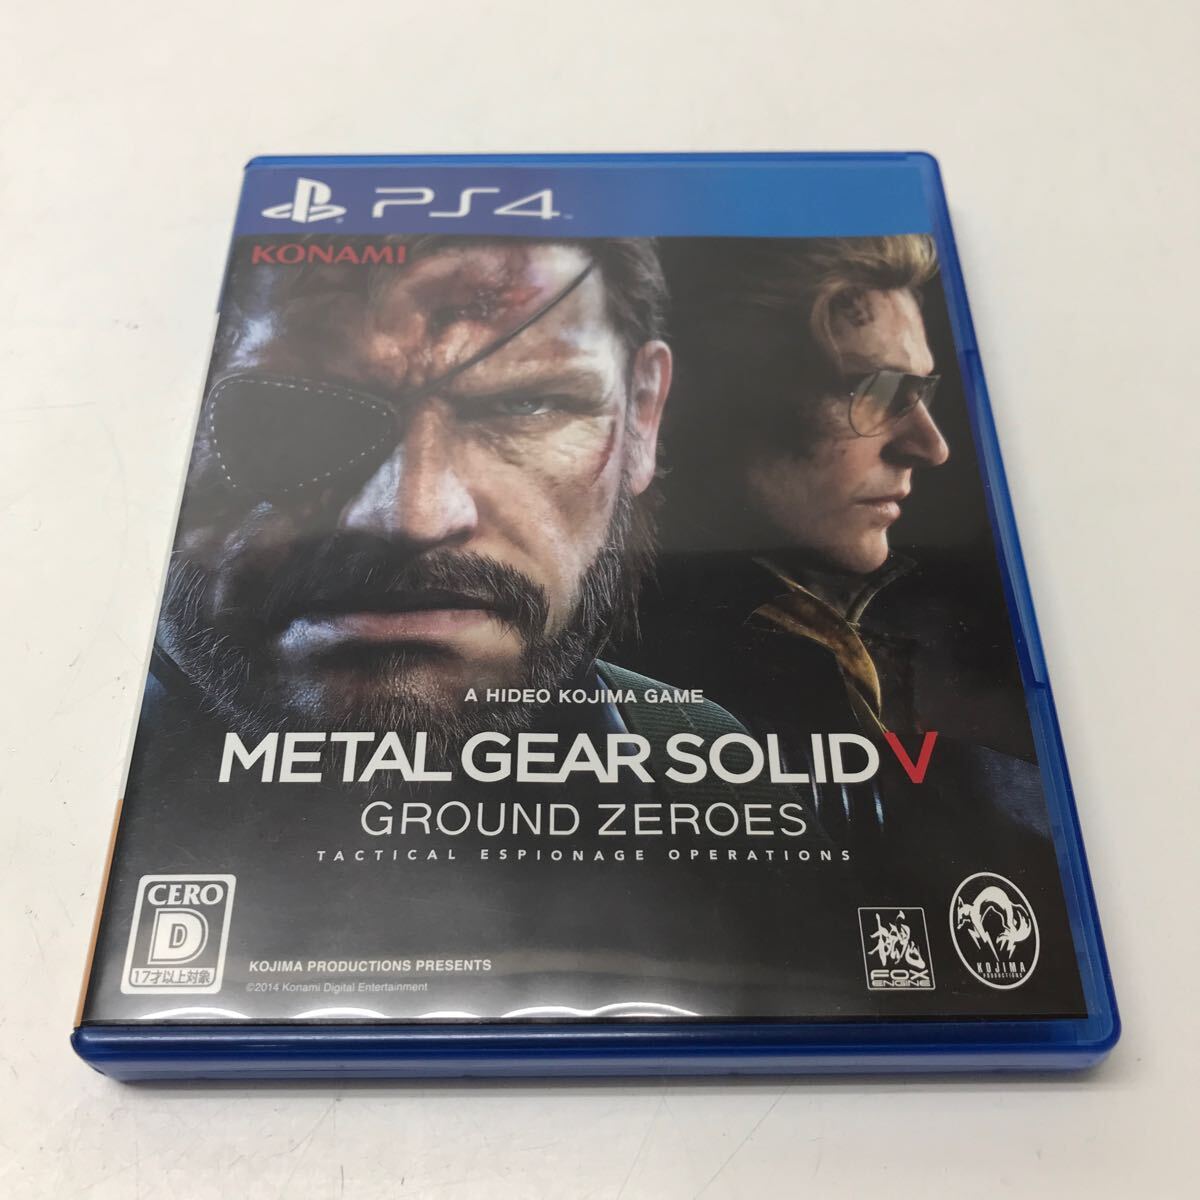 A576★Ps4ソフト METAL GEAR SOLID V:GROUND ZEROES【動作品】_画像1